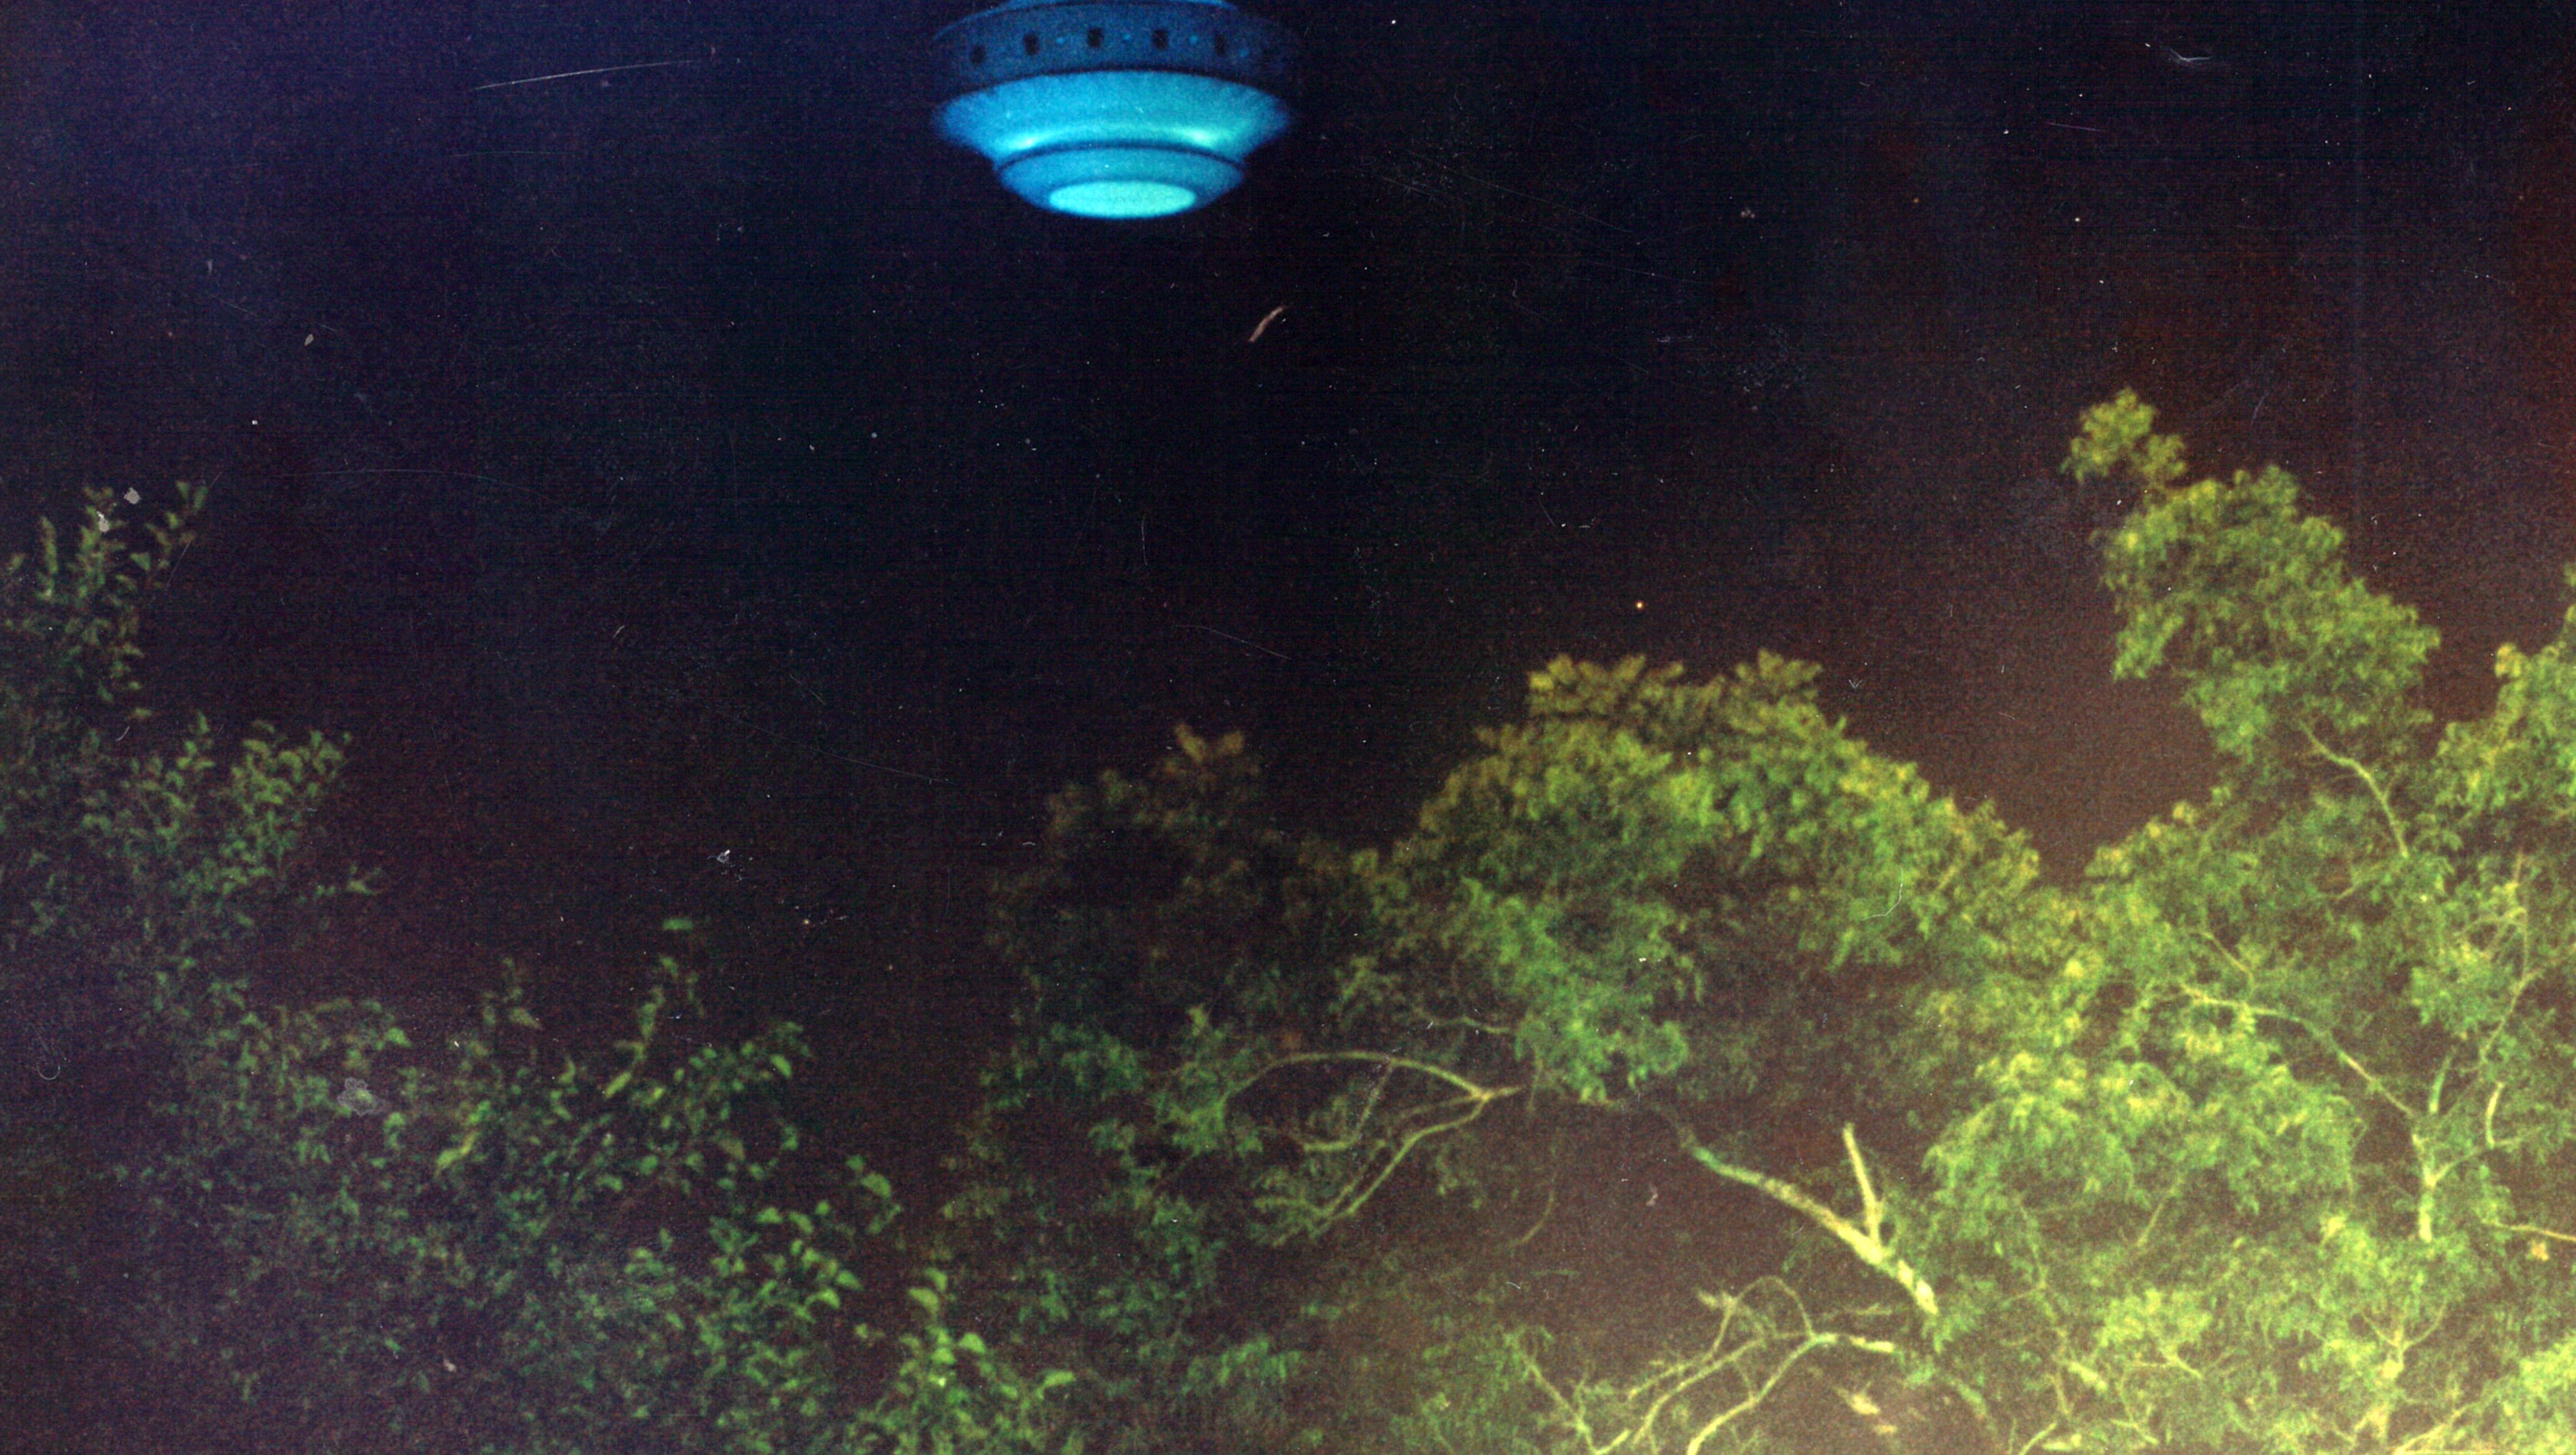 Gulf Breeze UFO sightings: 30 years later, public still divided